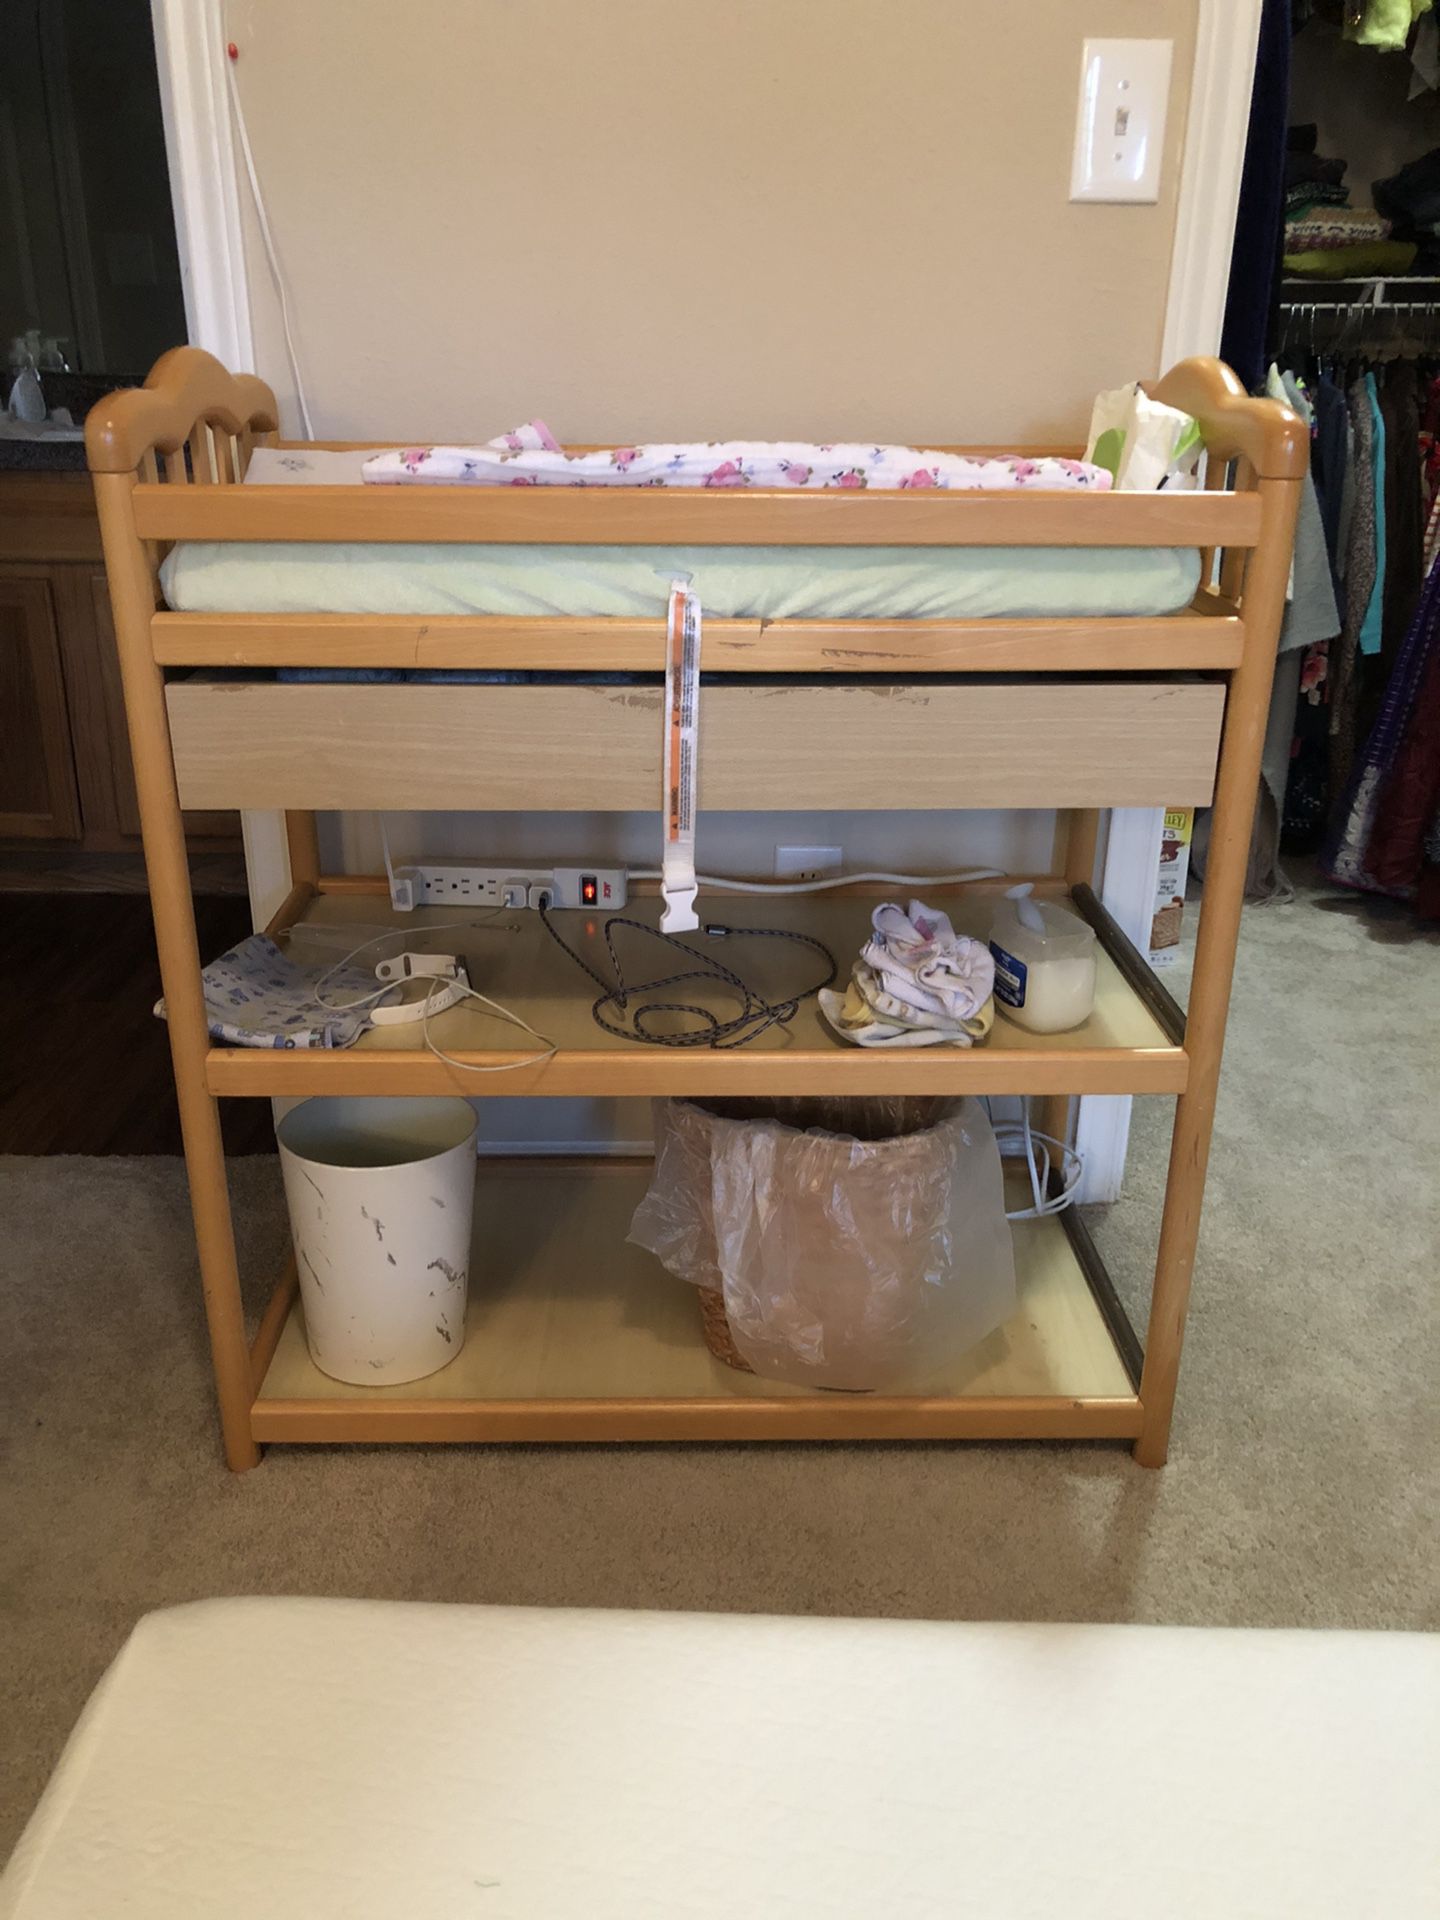 Solid wood Diaper table paid 180$ asking only 35$ first come first serve. Has safety belt and drawer! Plenty of storage